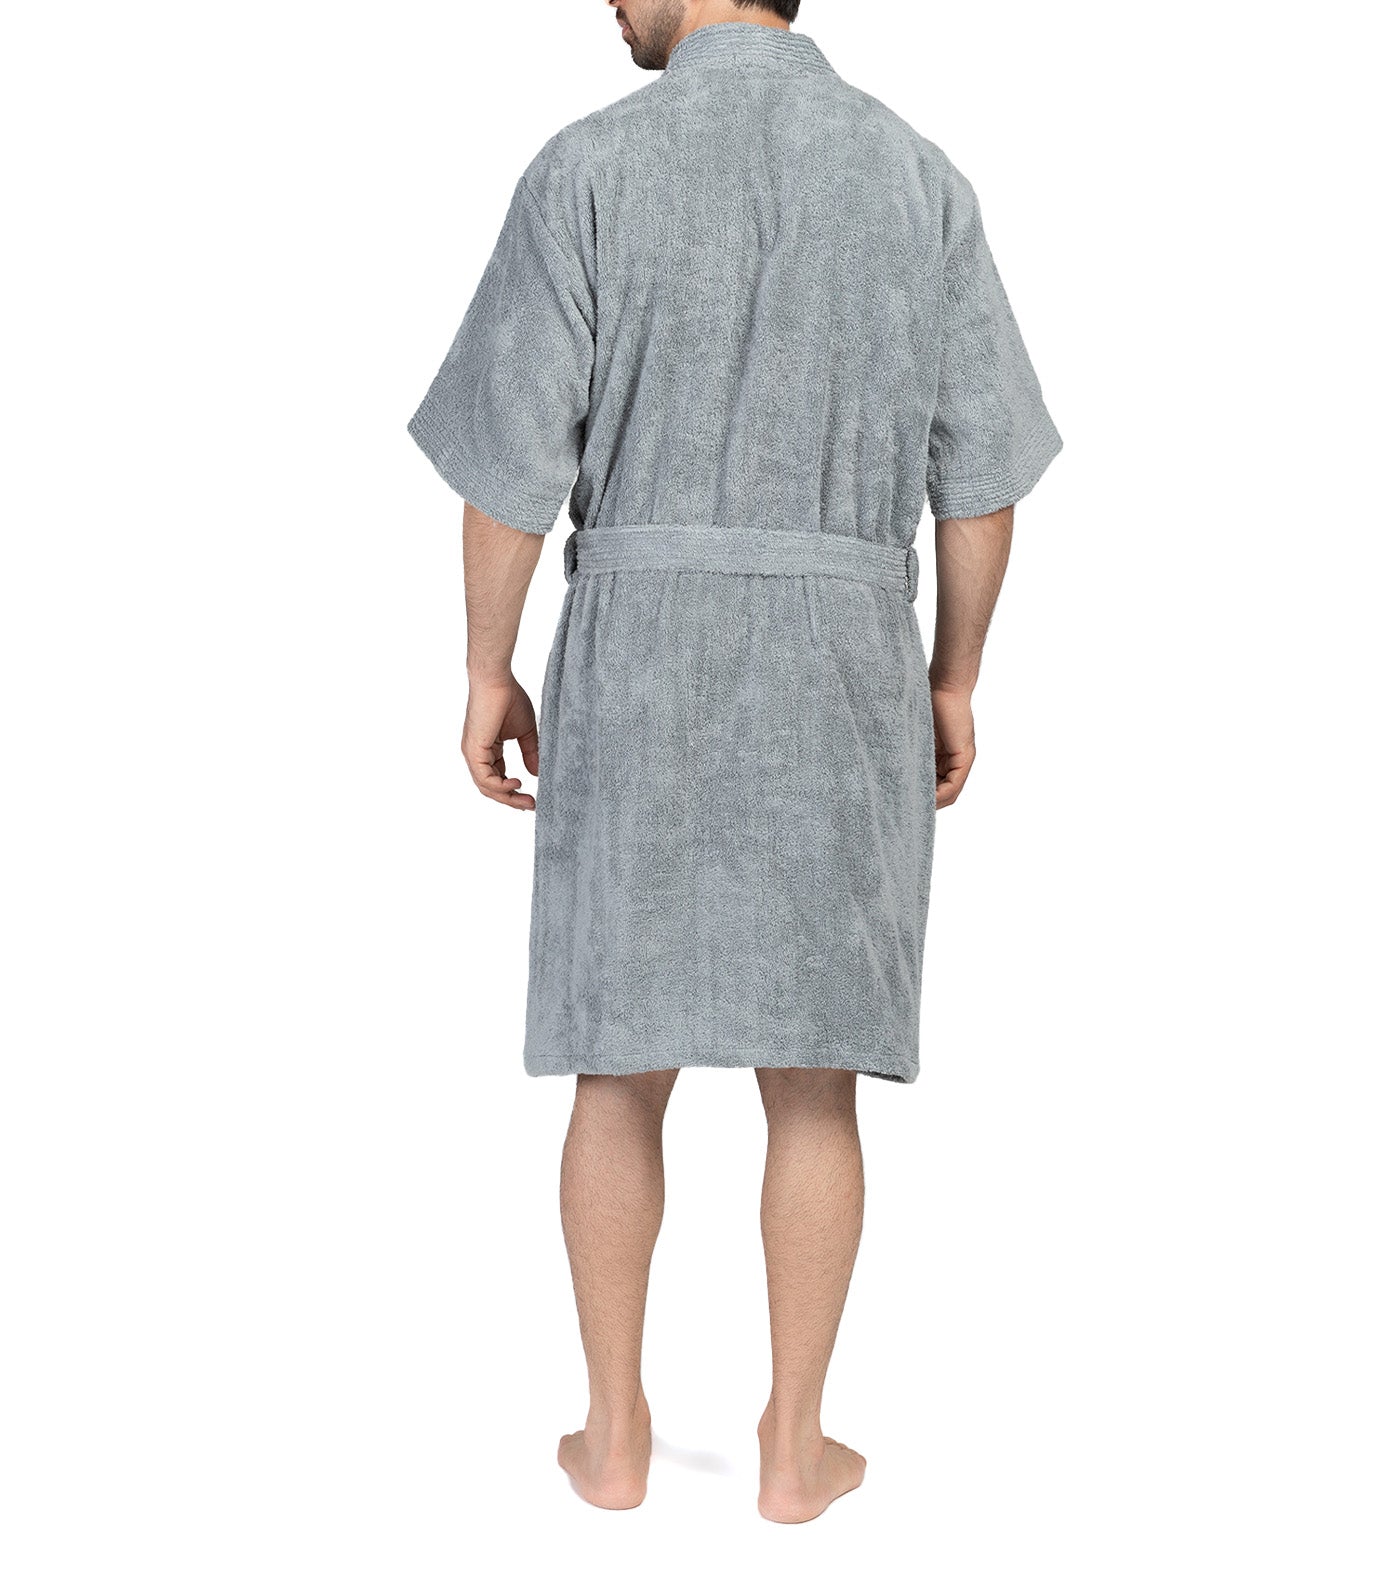 Terry Robe for Male - Slate Gray